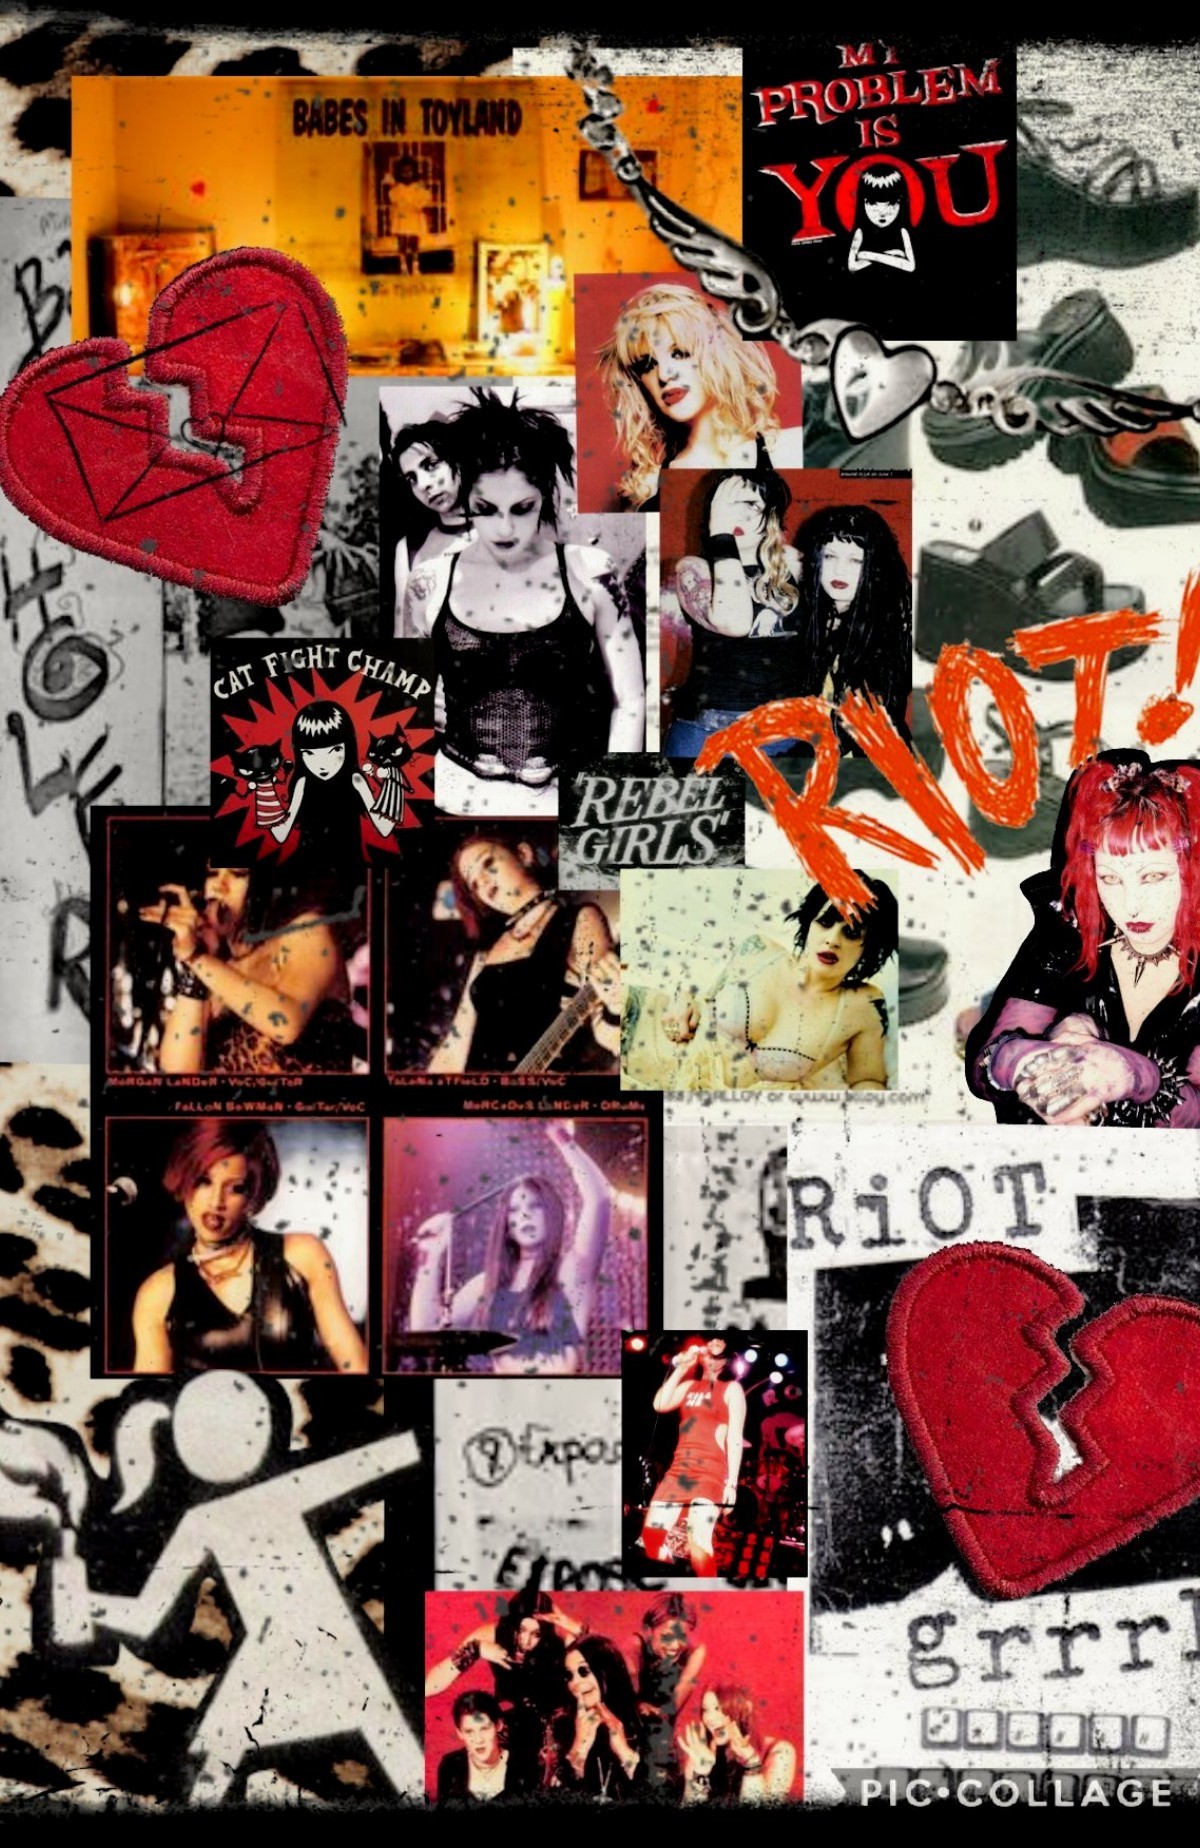 5 ♪ 25 ♪ 2022 ✂ i have been sooo inactive, so srry abt abt that !! im finally done with exams, and officially out of school woohoo!!! heres a women in rock (metal, subcultures, blahblah) appreciation collage collage=-) - mxlanie